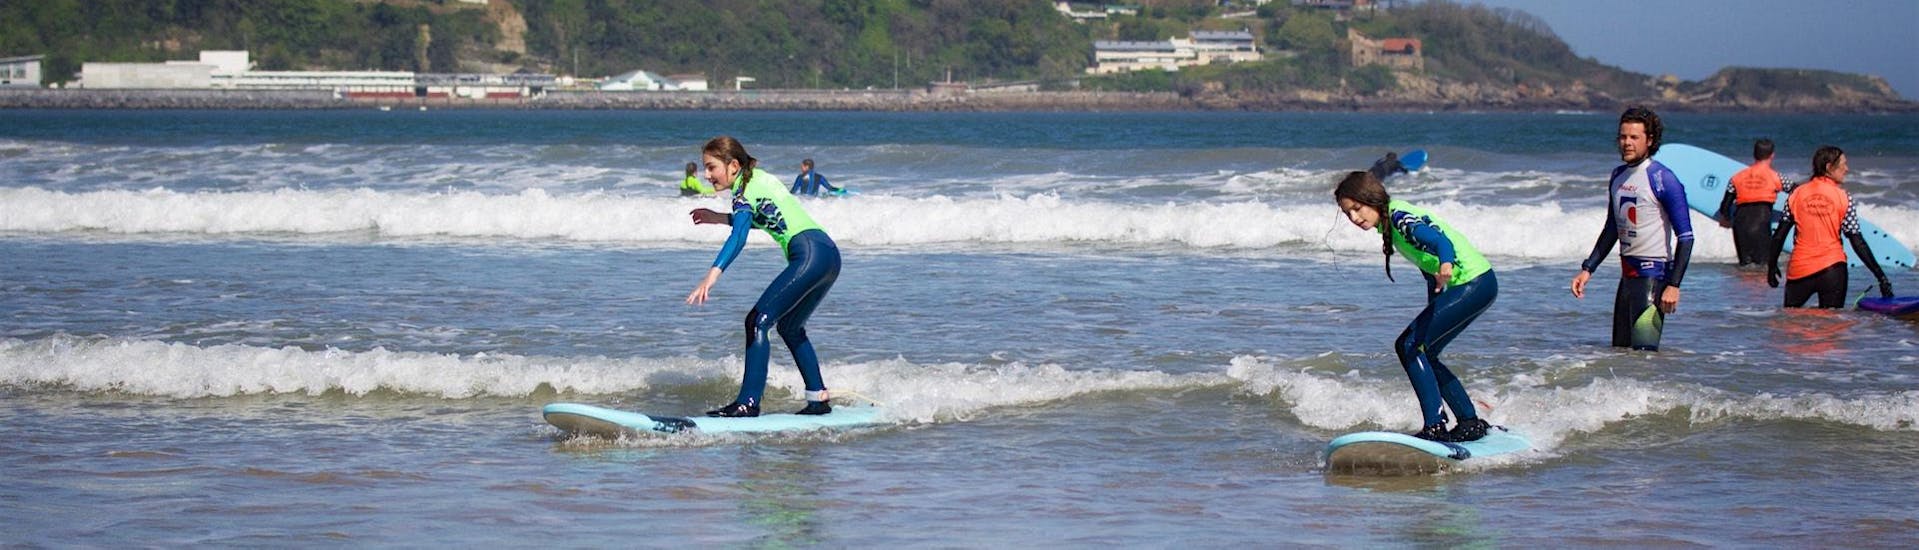 Weekend Surf Lessons - Incl. Transfer to Hendaye.